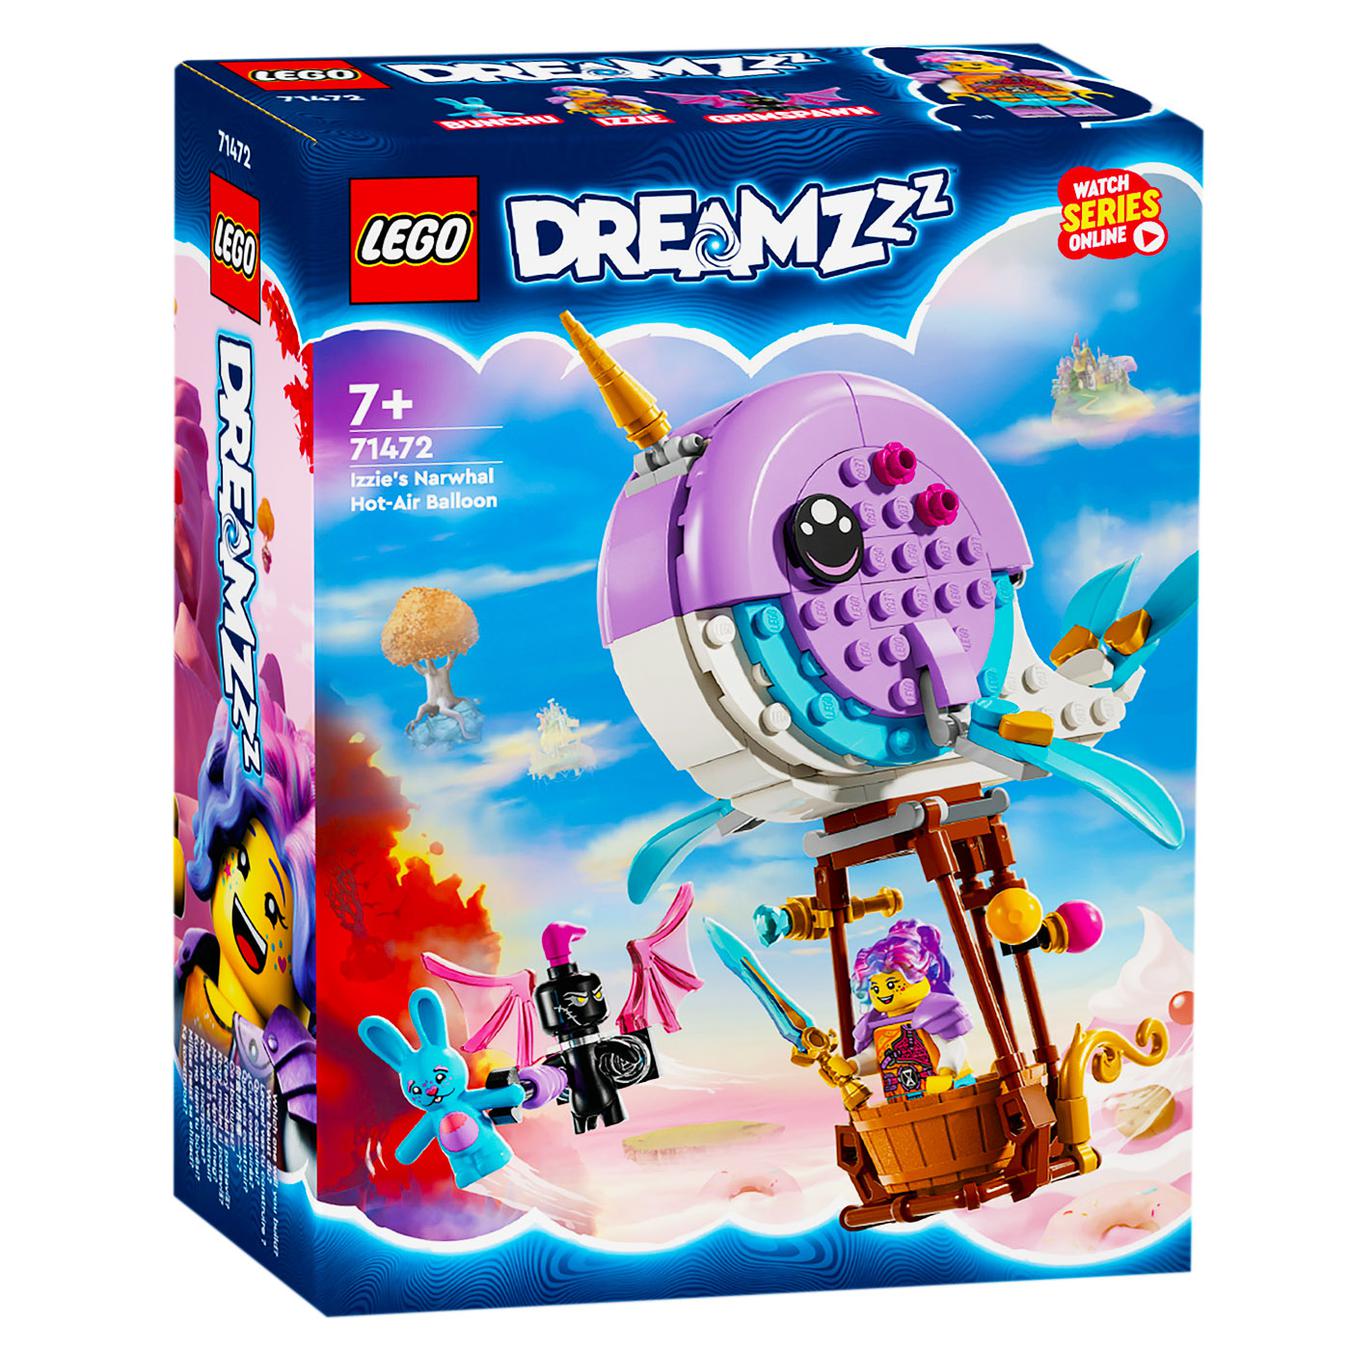 Constructor LEGO Dreamzzz 71472 Balloon Izzy Narwhal"